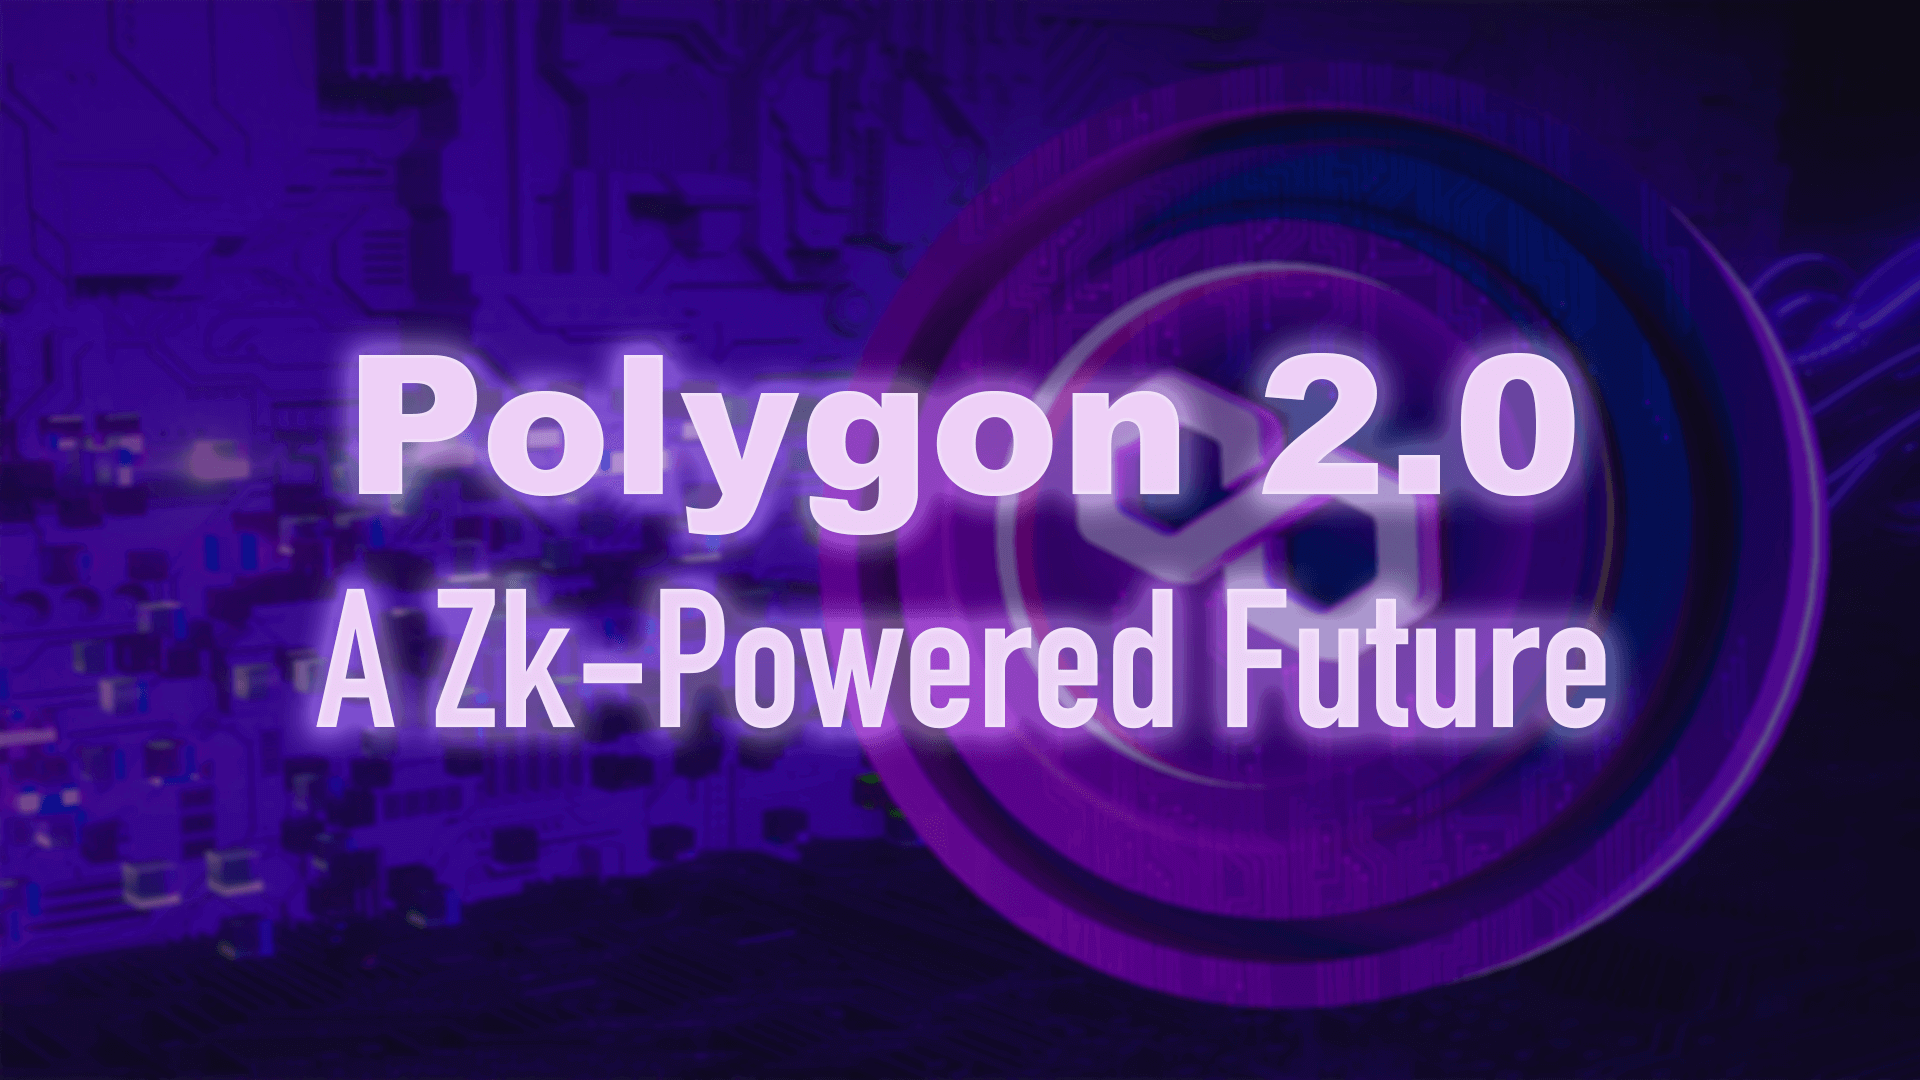 Polygon 2.0: A Zk-powered Future